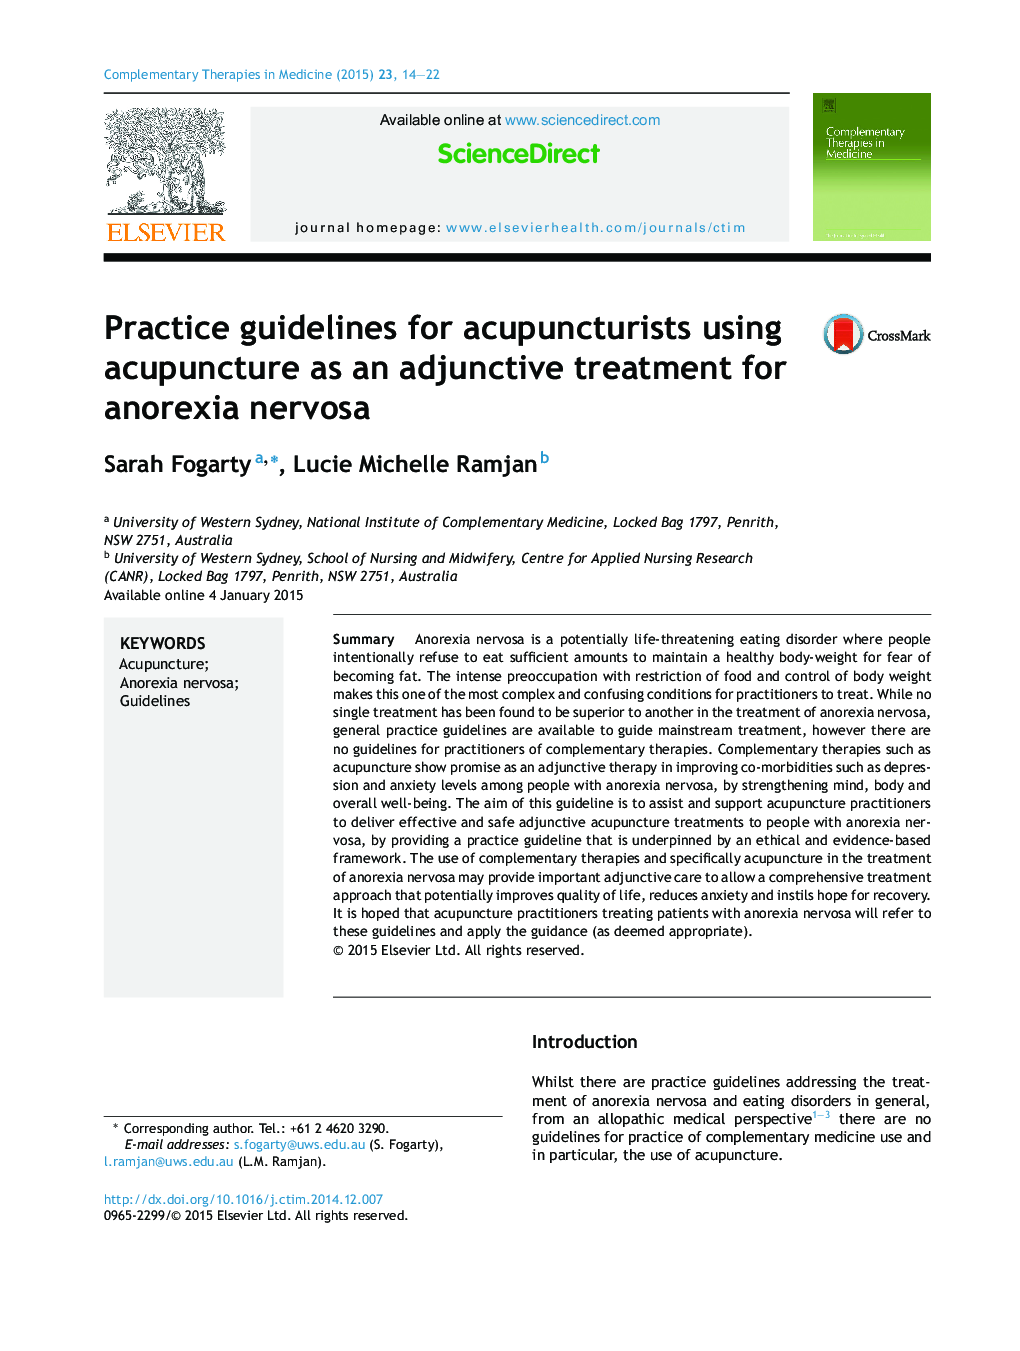 Practice guidelines for acupuncturists using acupuncture as an adjunctive treatment for anorexia nervosa